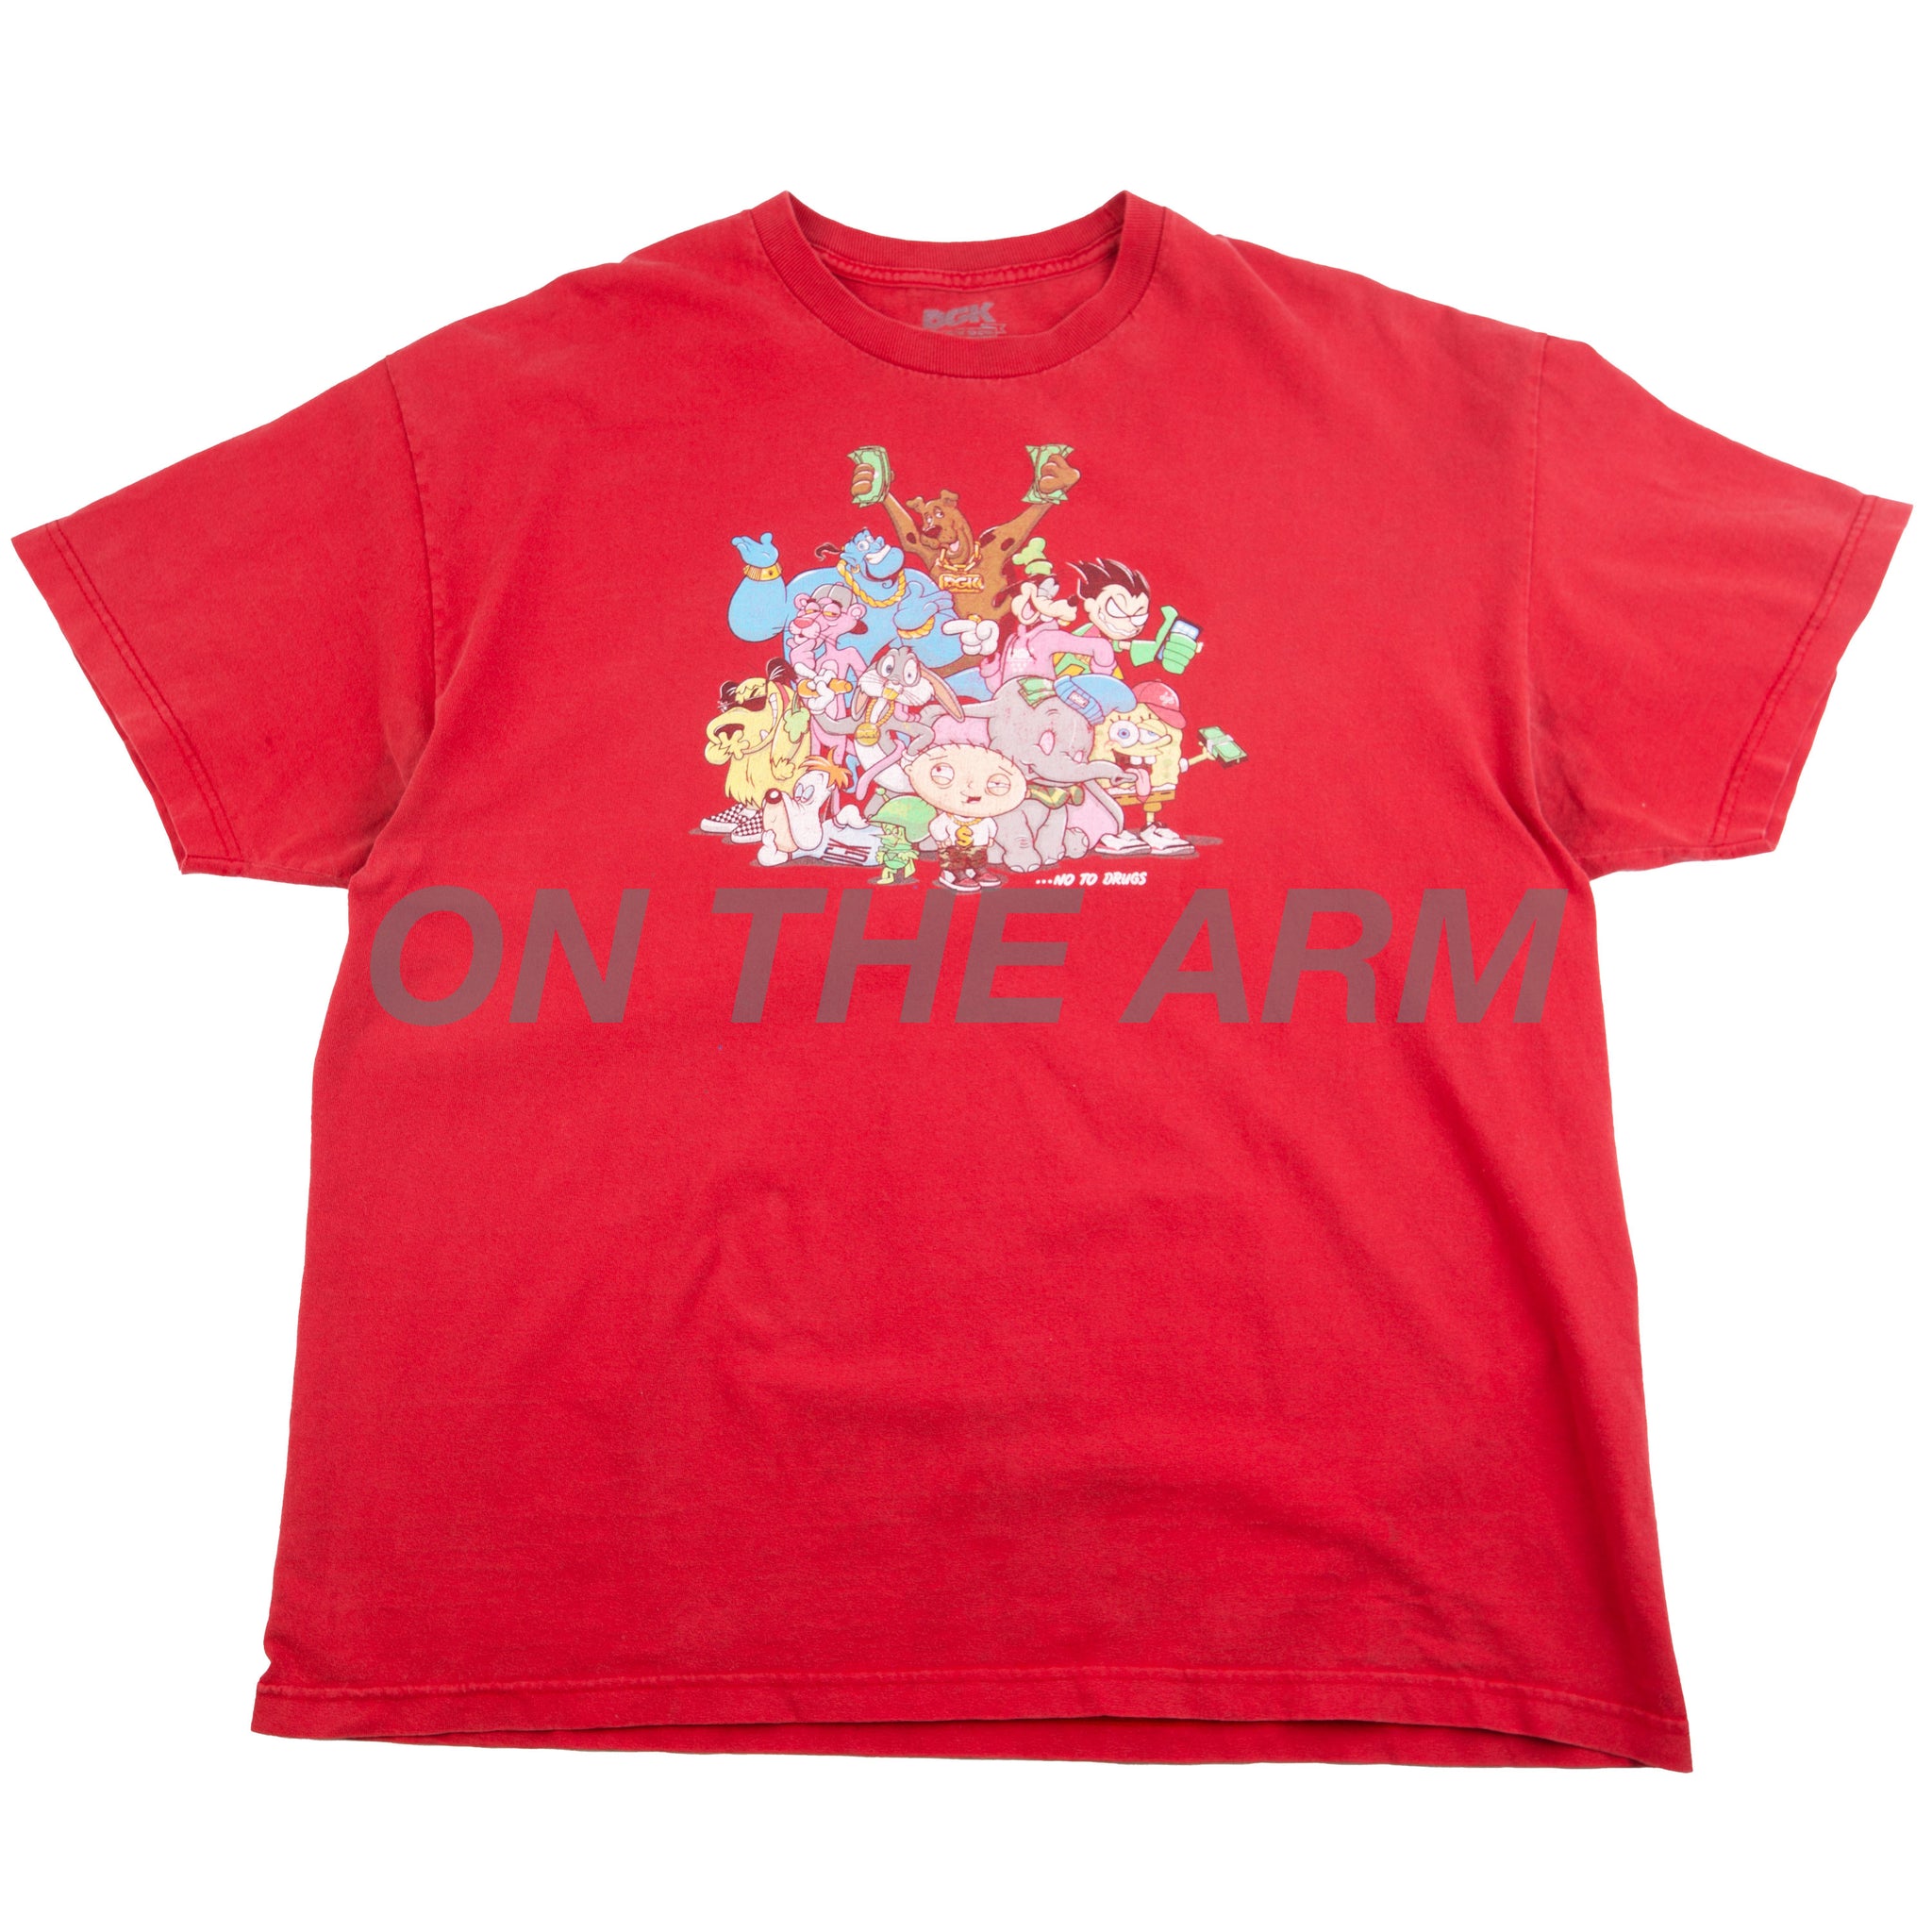 DGK Red No To Drugs Tee (2000's) PRE-OWNED